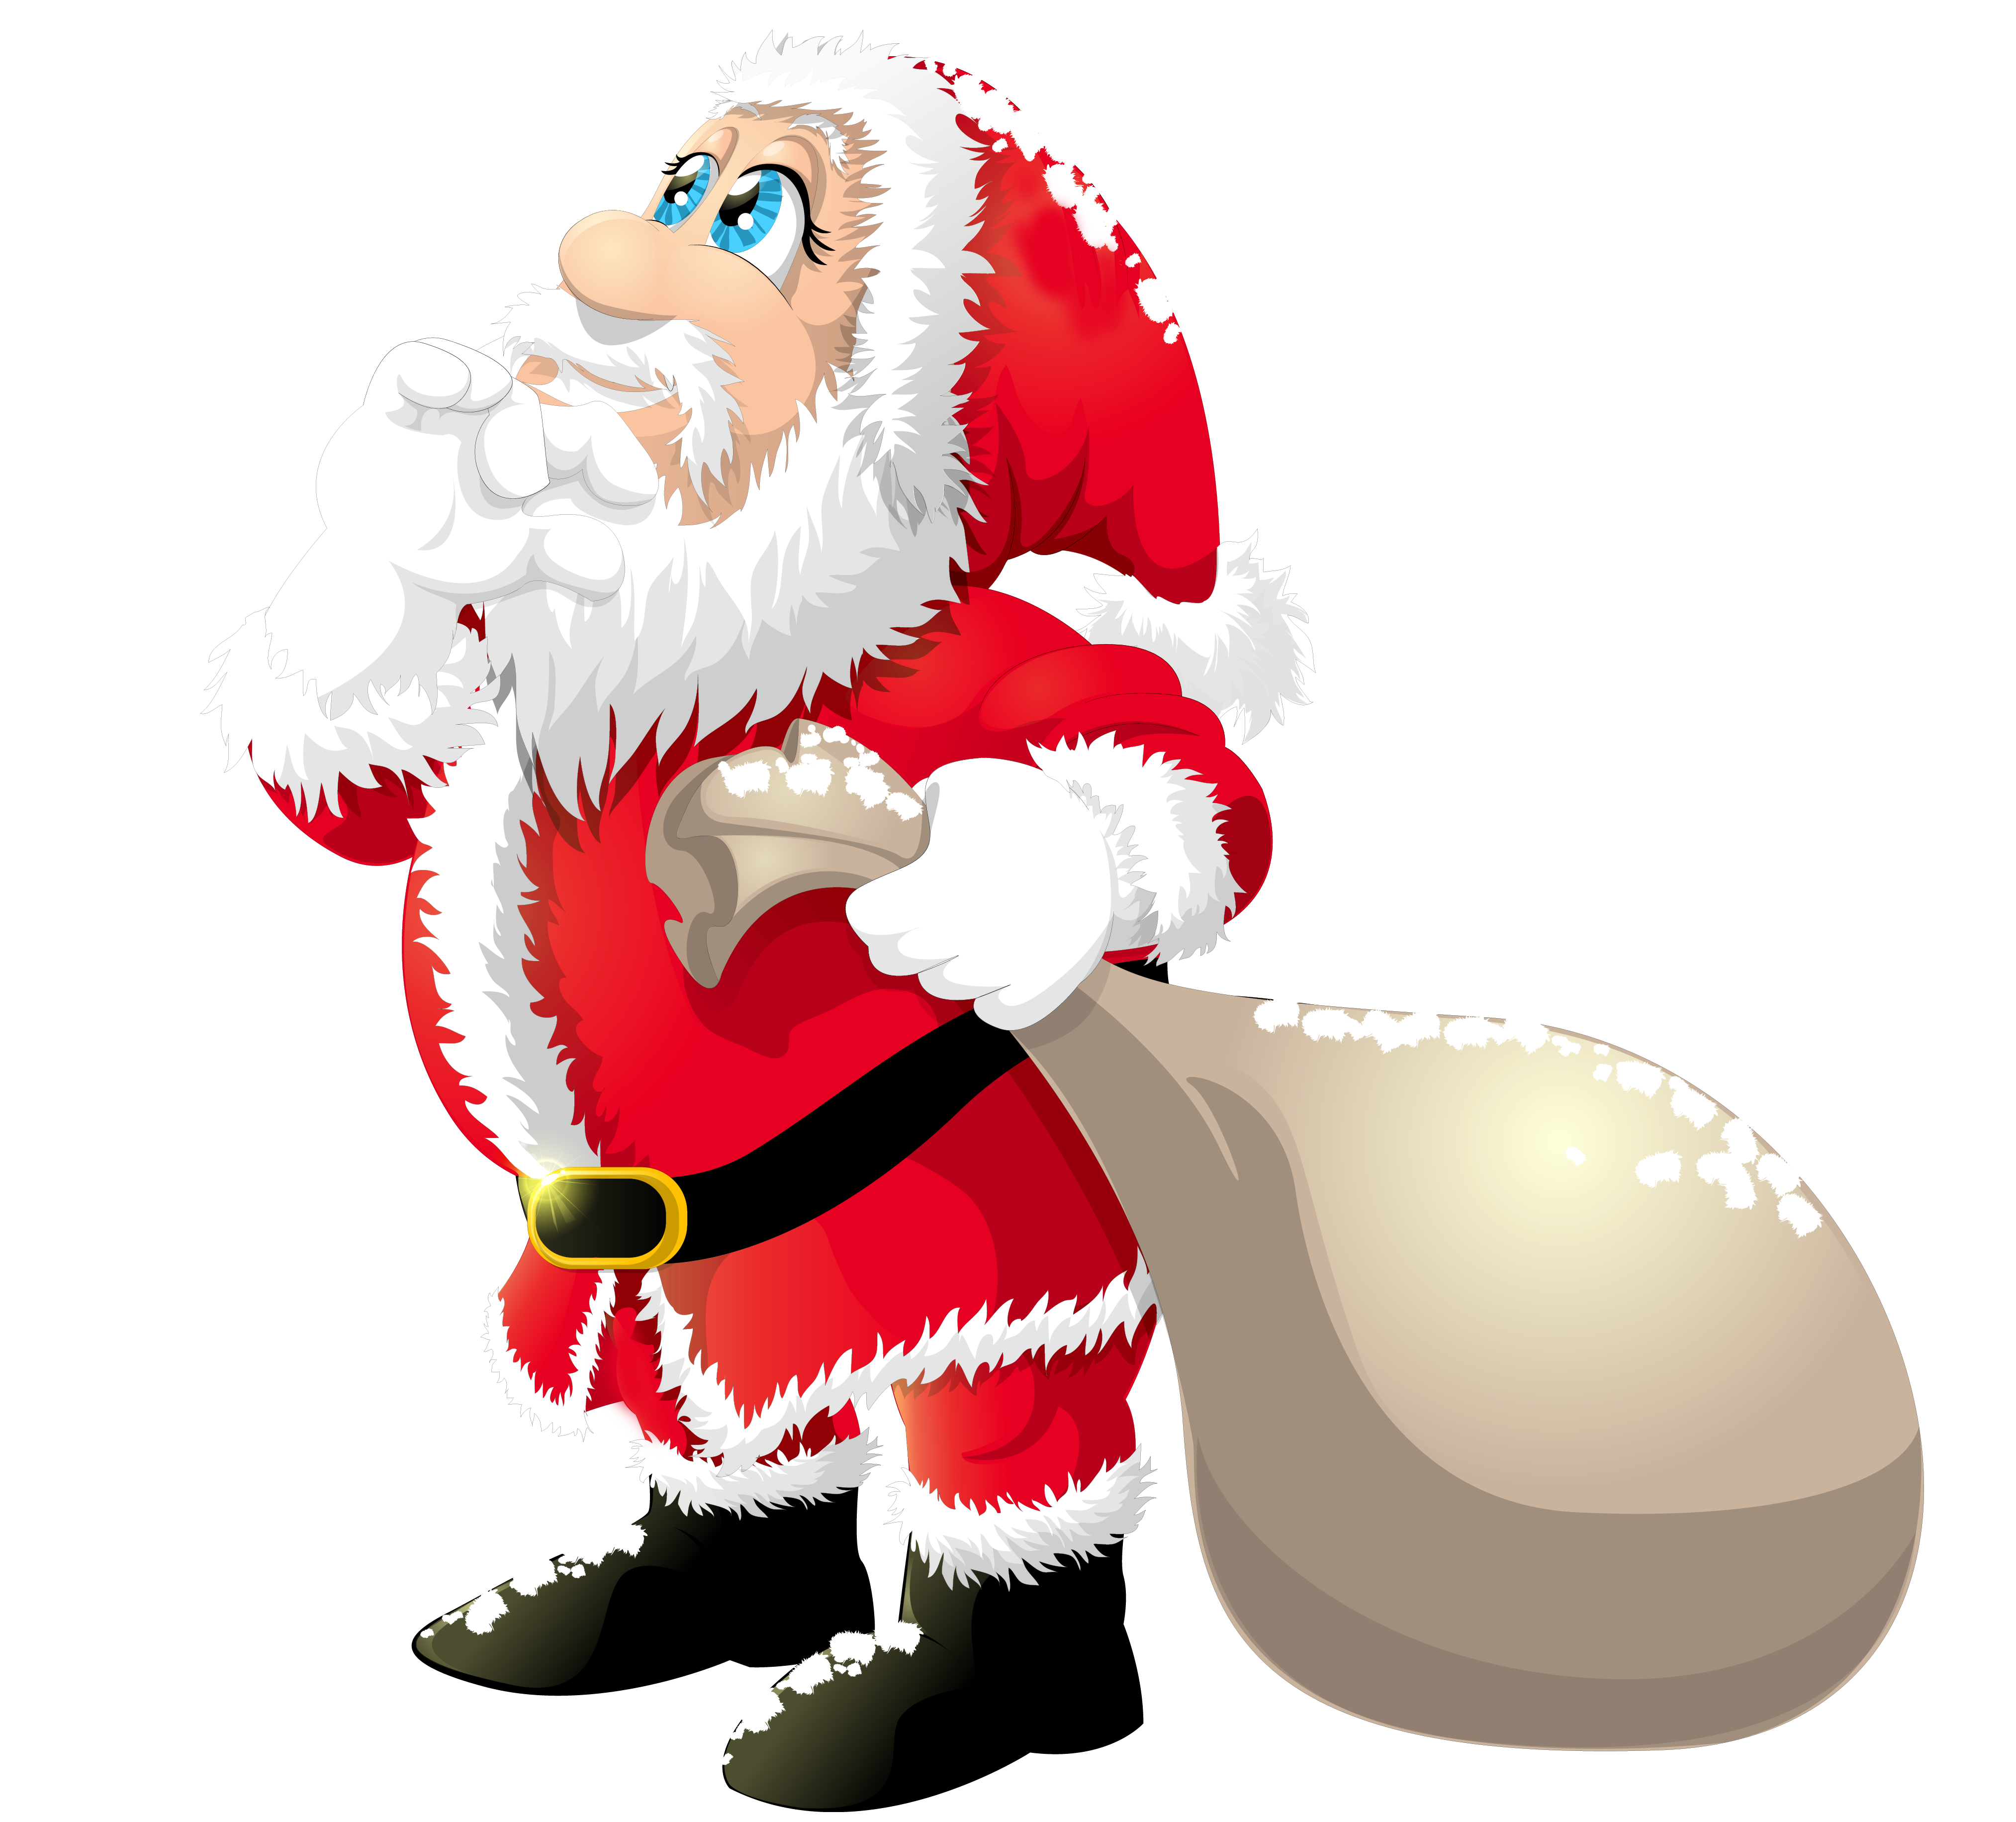 Free Santa Claus Pictures Images, Download Free Santa Claus Pictures